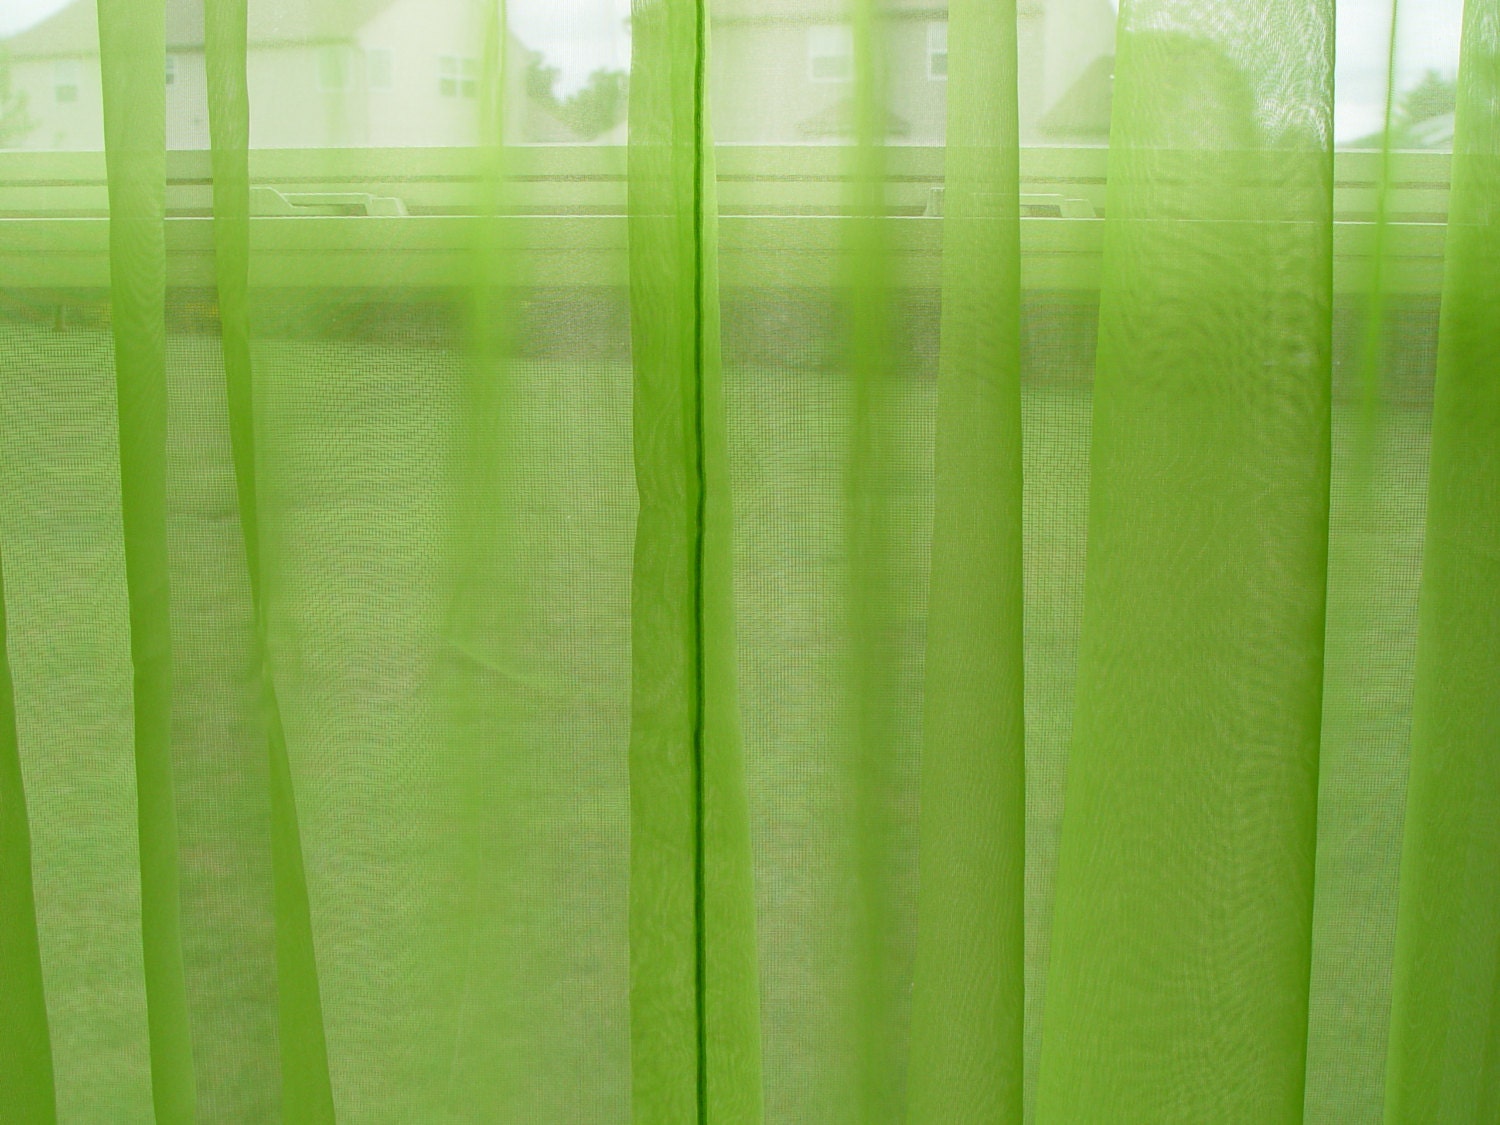 Hanging Curtains From The Ceiling Pastel Green Sheer Curtains